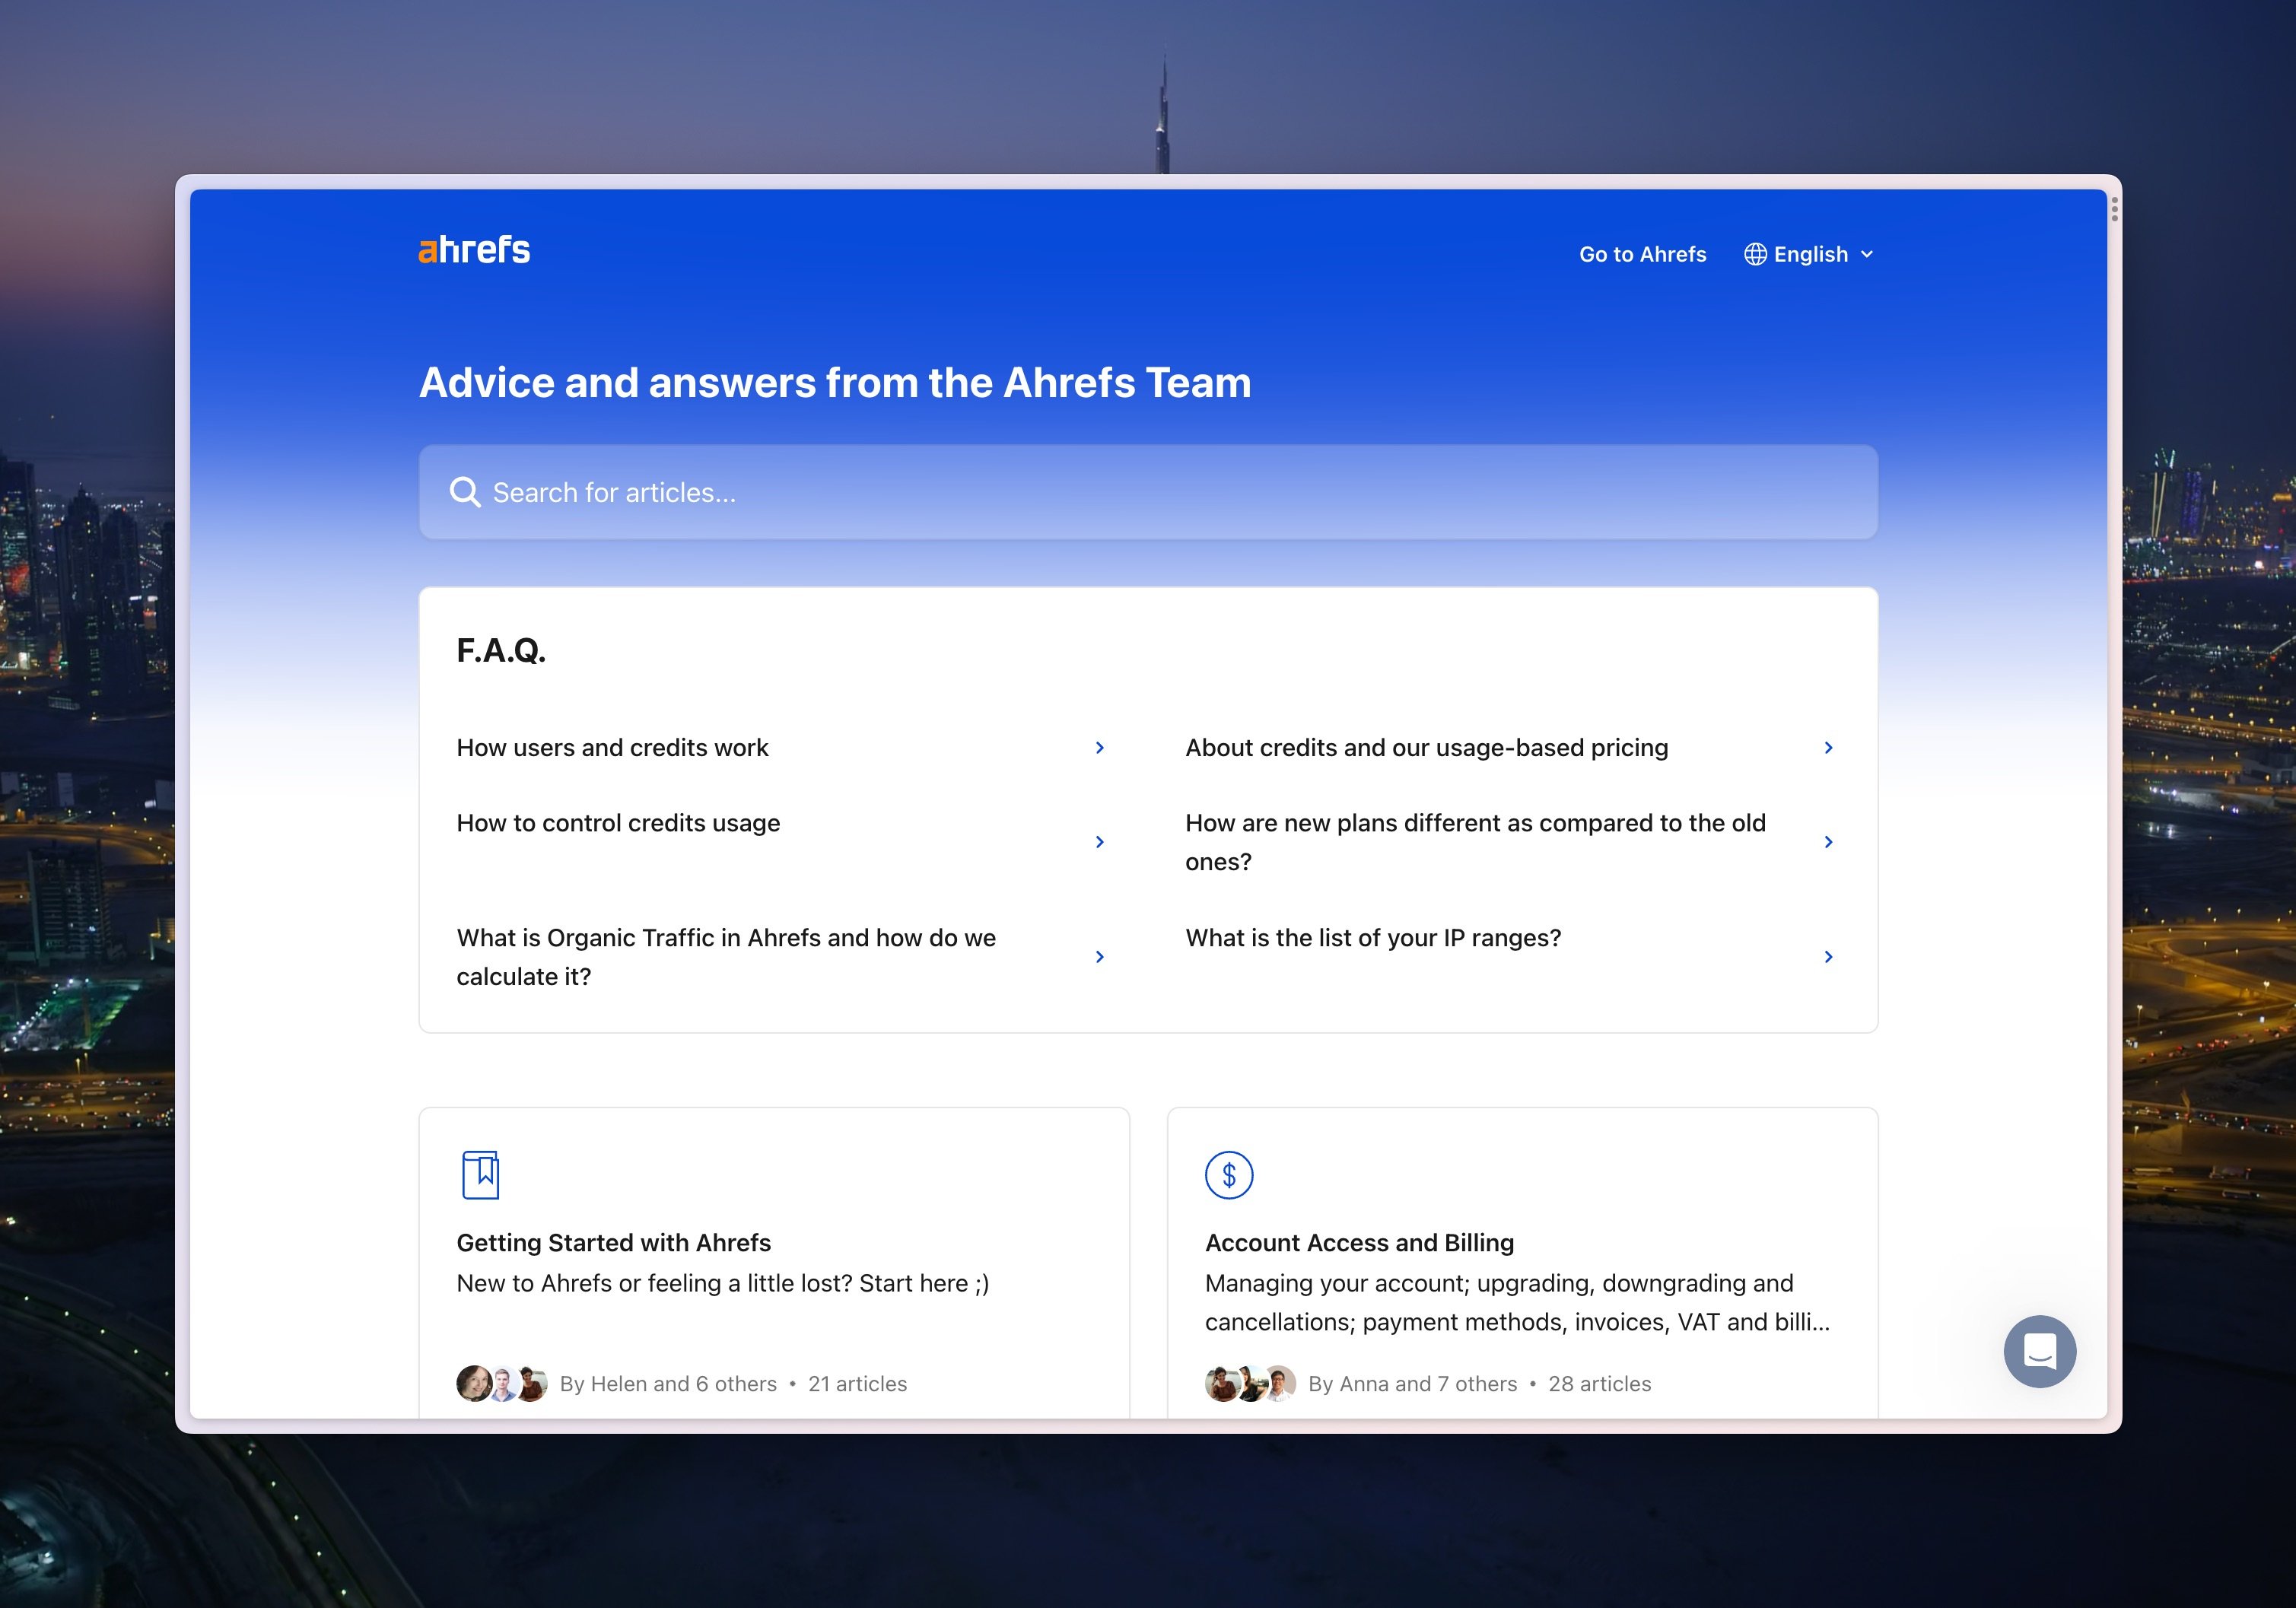 Ahrefs Product Support Center and User Guides